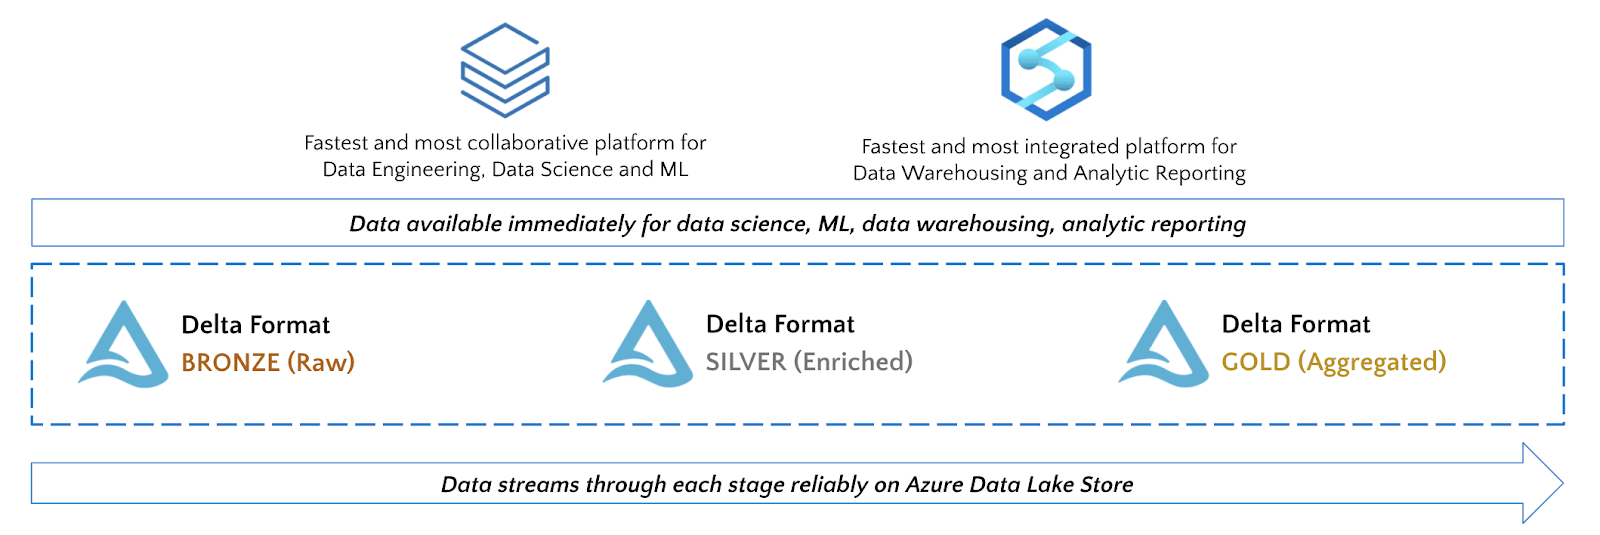 While leveraging Azure Databricks and Azure Synapse, use the best tool for the job given your team’s requirements.